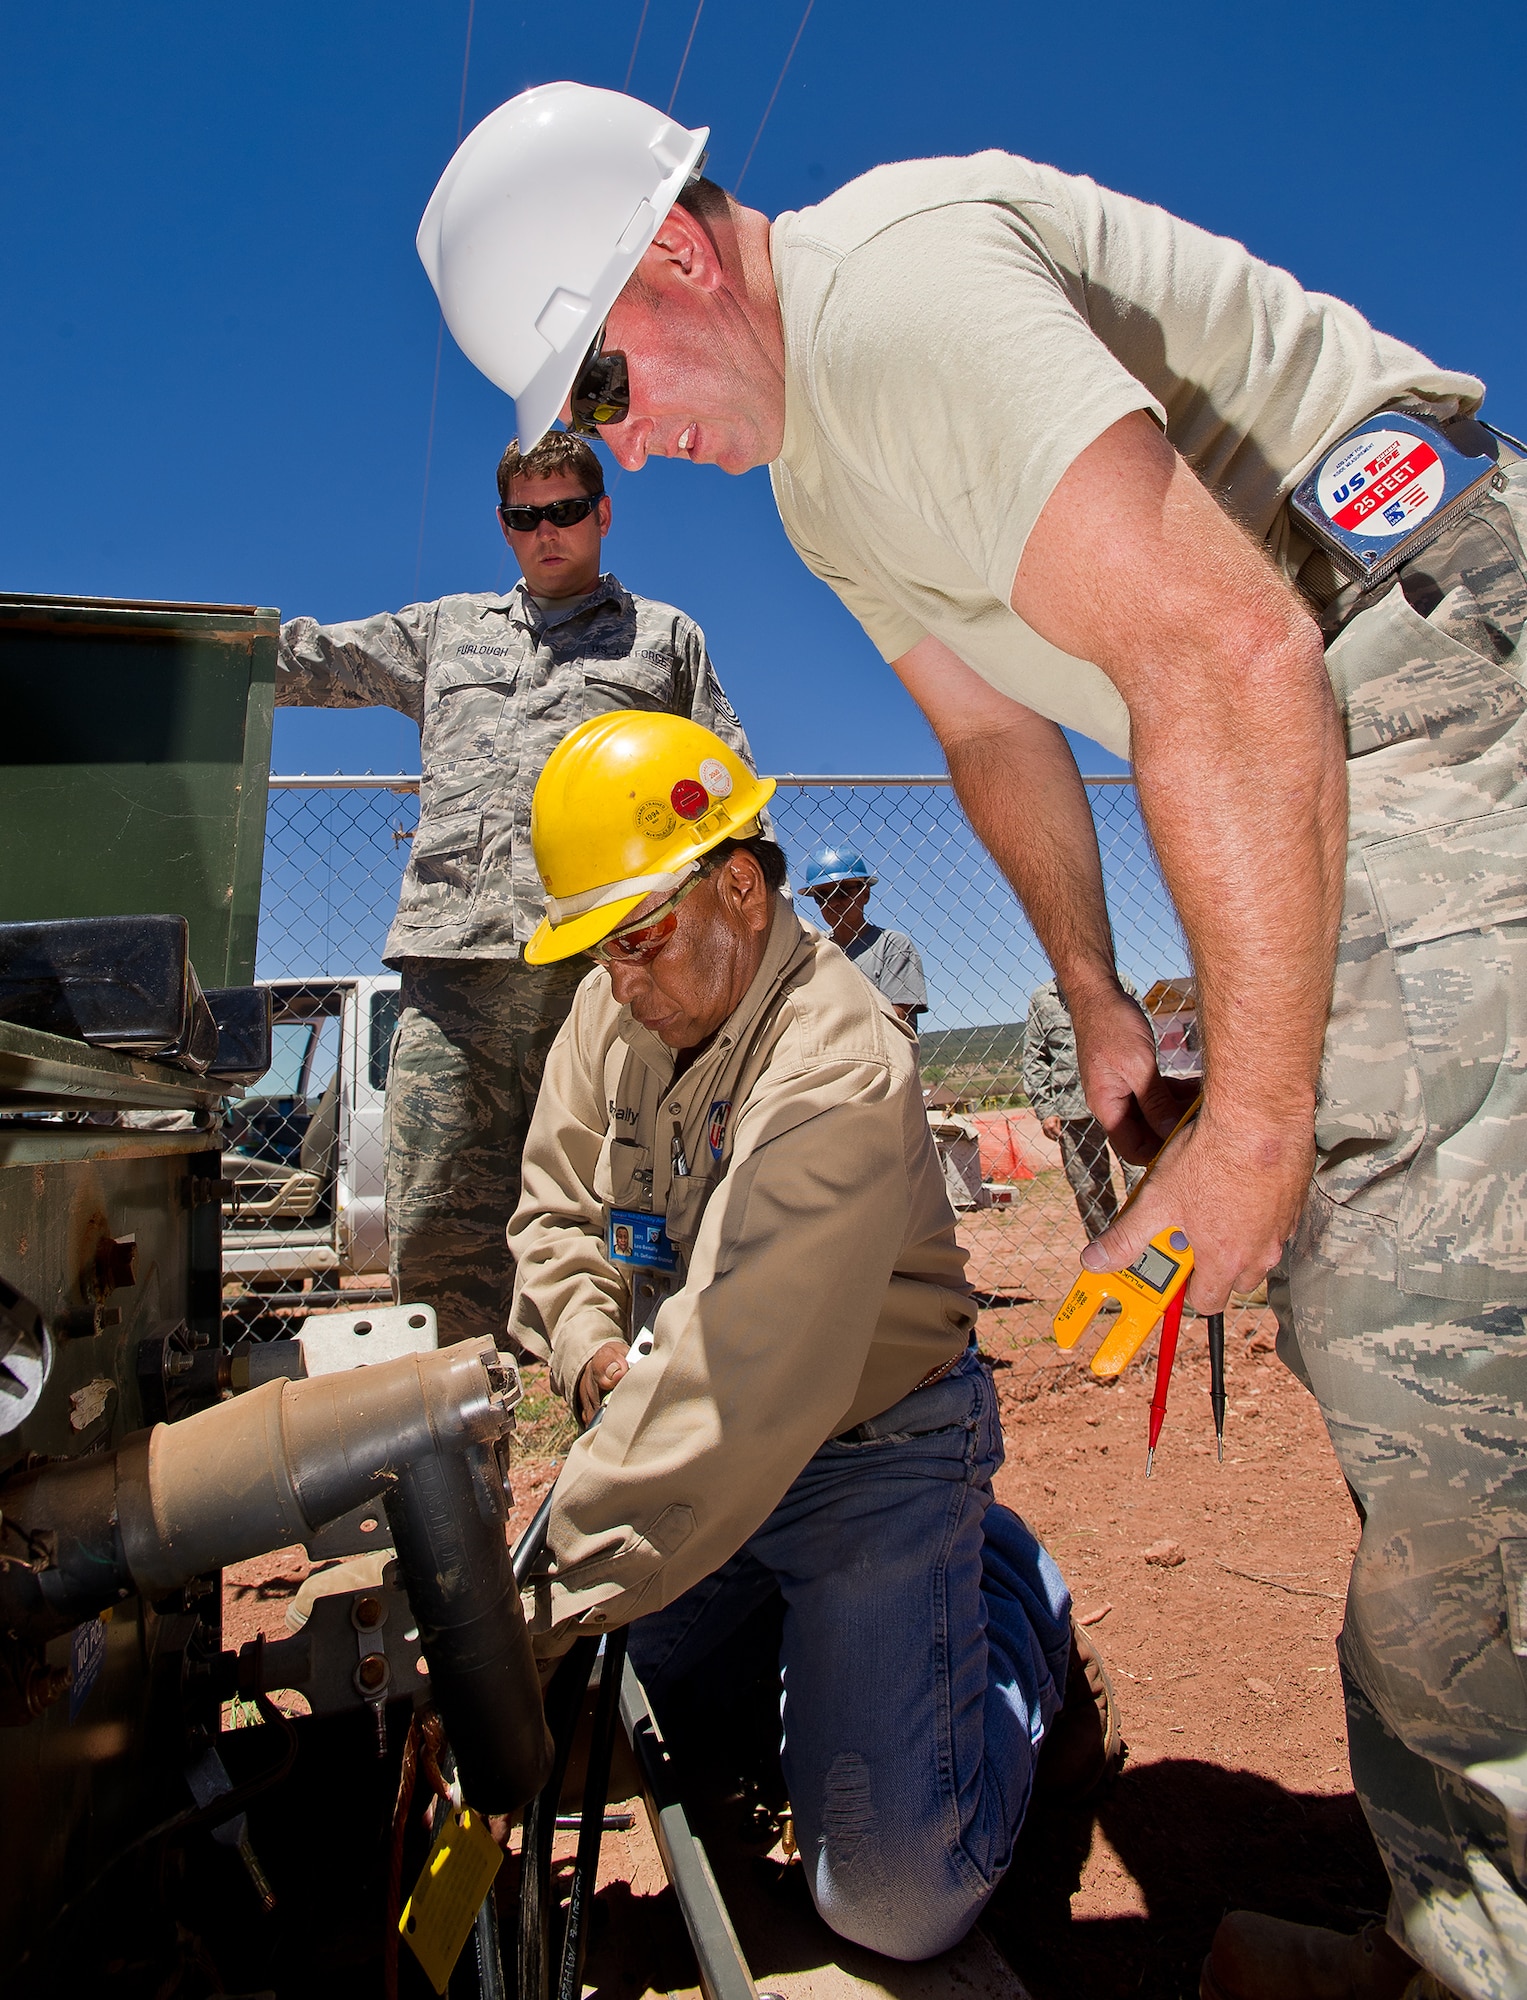 Tech. Sgts. Brian Harrison (right) and Joel Furlough, Electrical workers with the 116th Civil Engineering Squadron, troubleshoot a power outage problem with utility worker Leo Benally, Navajo Tribal Utility, at St. Michaels Association for Special Education, Window Rock, Ariz., June 7, 2011. The 116th CES deployed to the Navajo Nation reservation for two weeks as a part of the Department of Defense Innovative Readiness Training program. (U.S. Air Force photo by Master Sgt. Roger Parsons/Released)